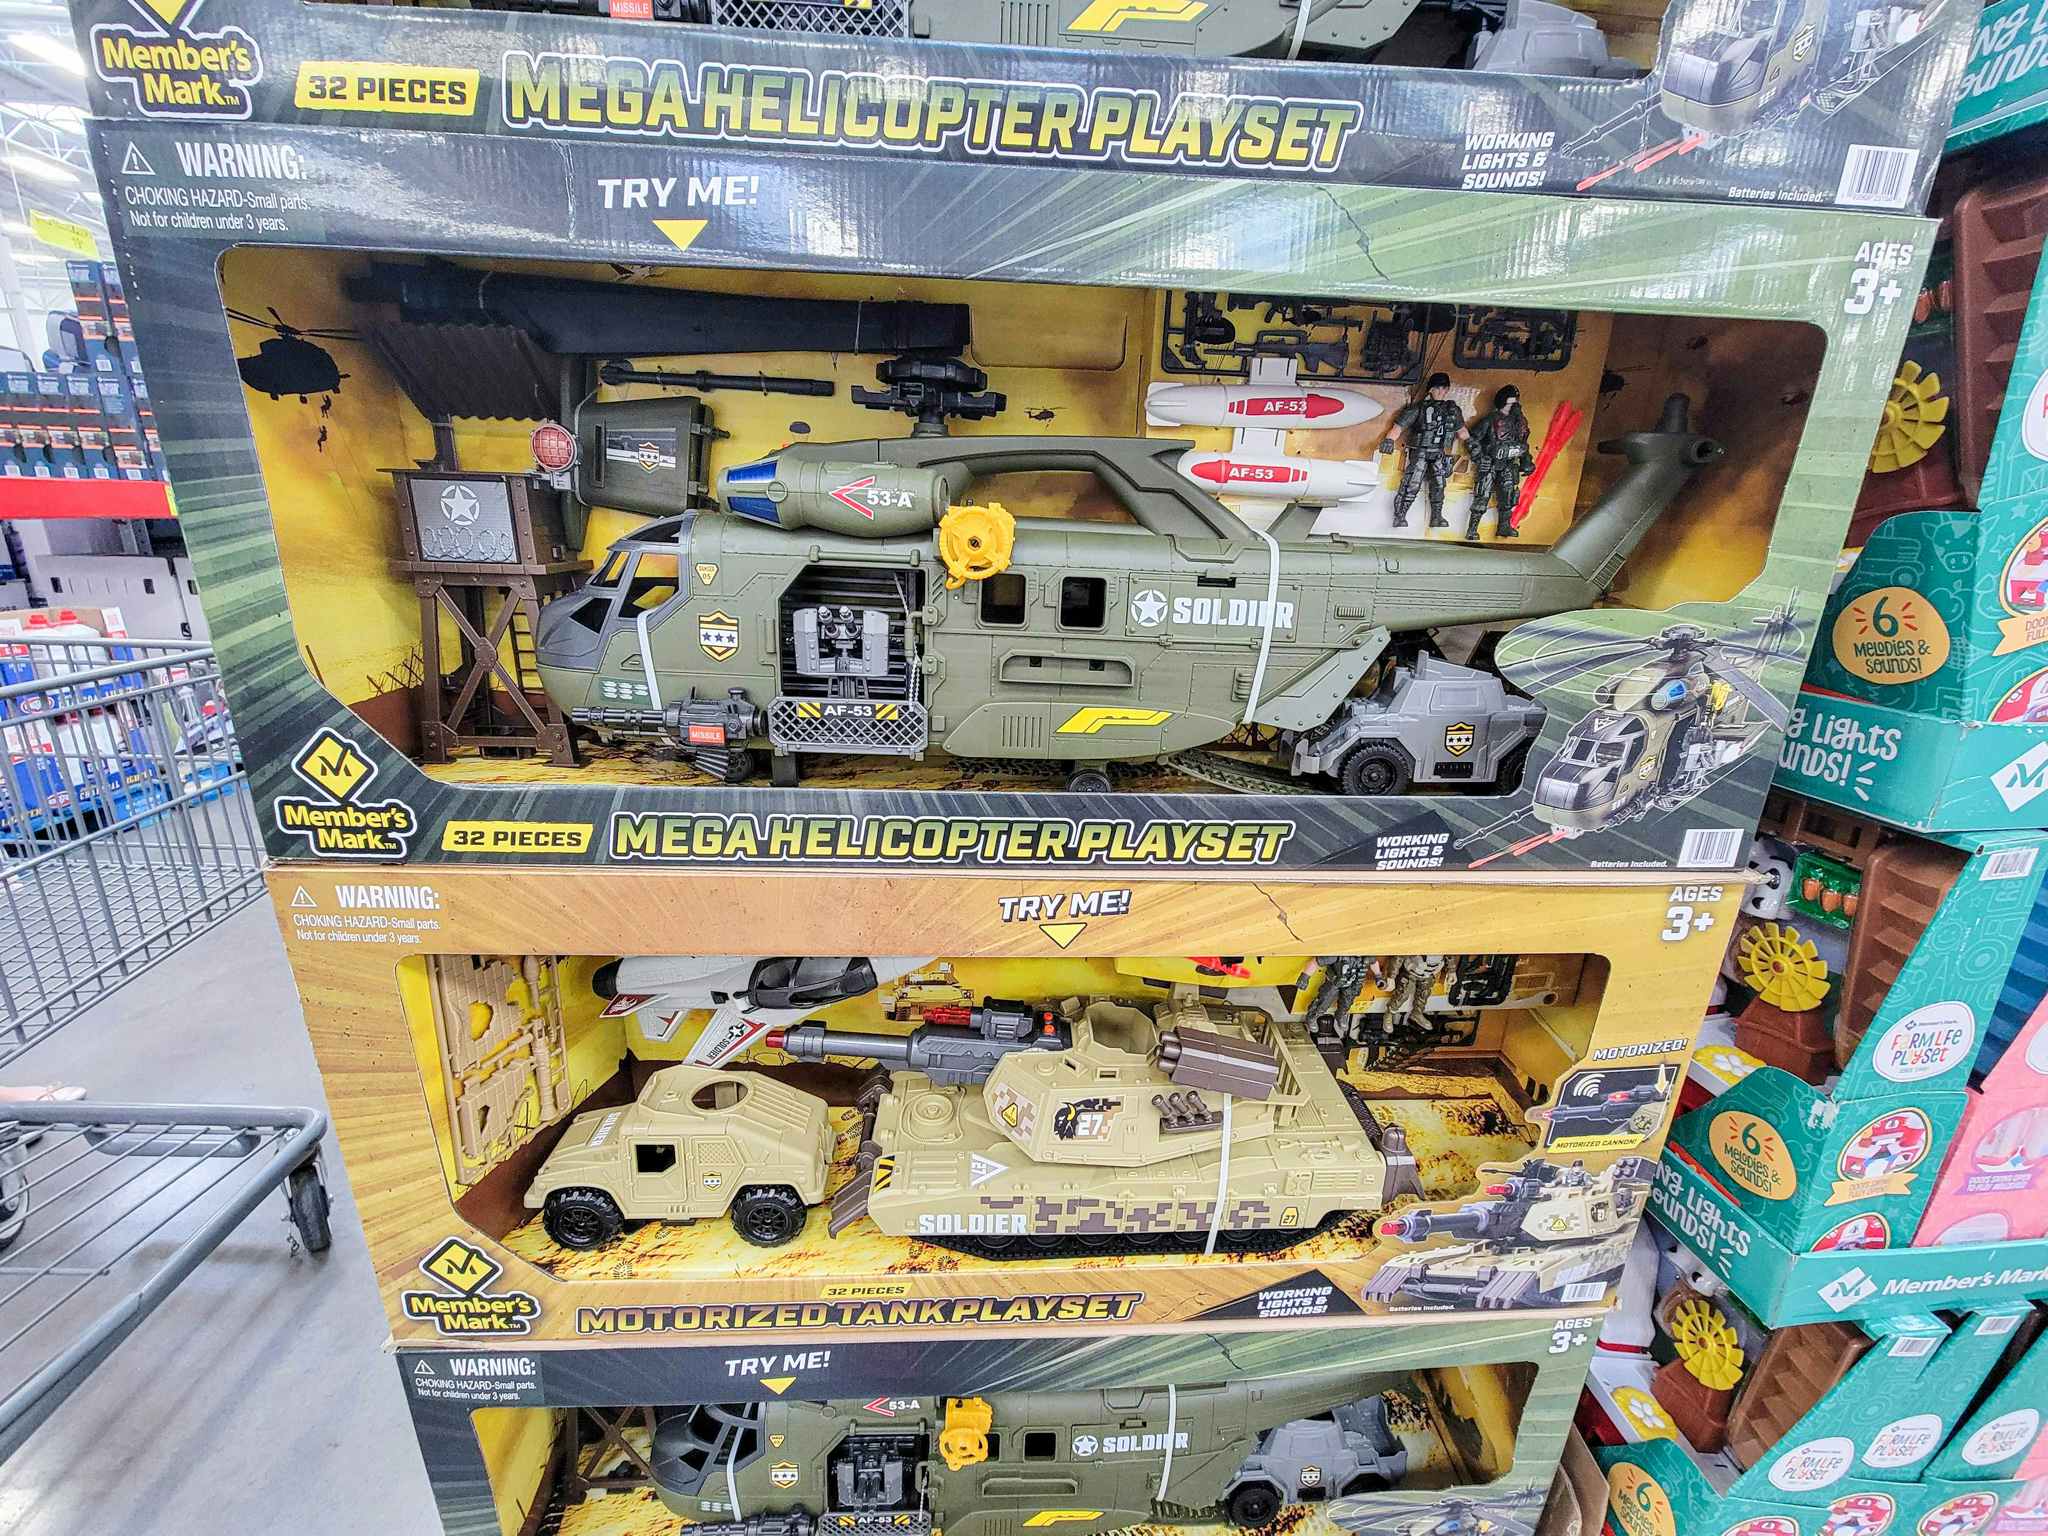 army themed playsets for kids including helicopters, trucks, tanks, and planes